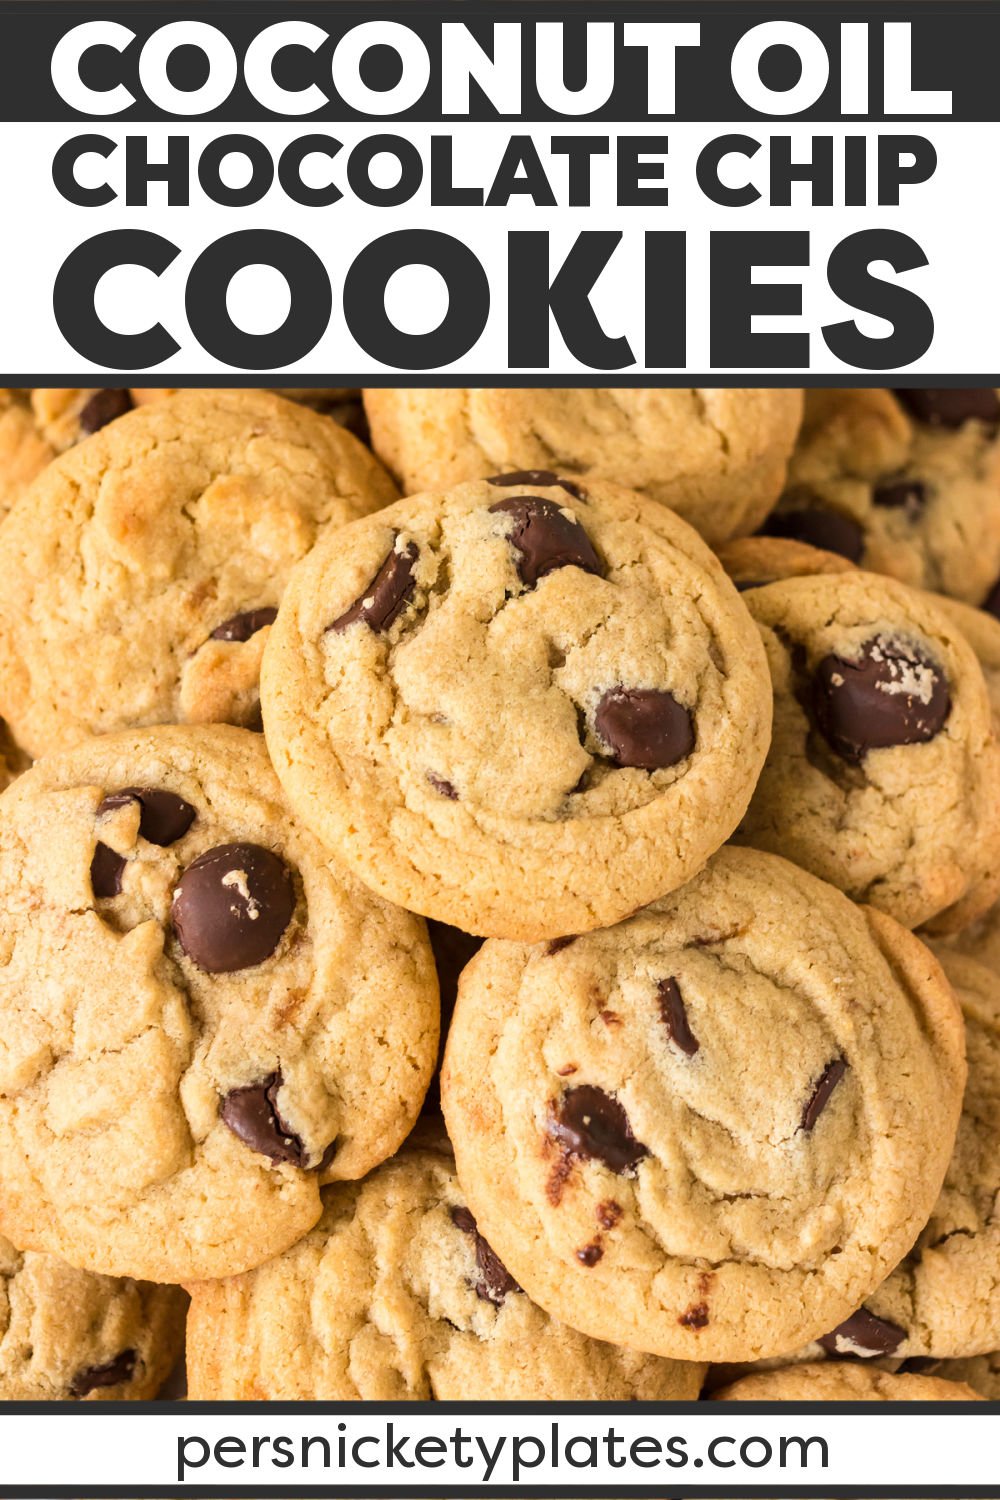 Coconut Oil Chocolate Chip Cookies are soft and chewy with rich chocolate chips and crisp edges. Made with coconut oil instead of butter, these chewy chocolate chip cookies have a mild coconut flavor and are super easy to make. | www.persnicketyplates.com